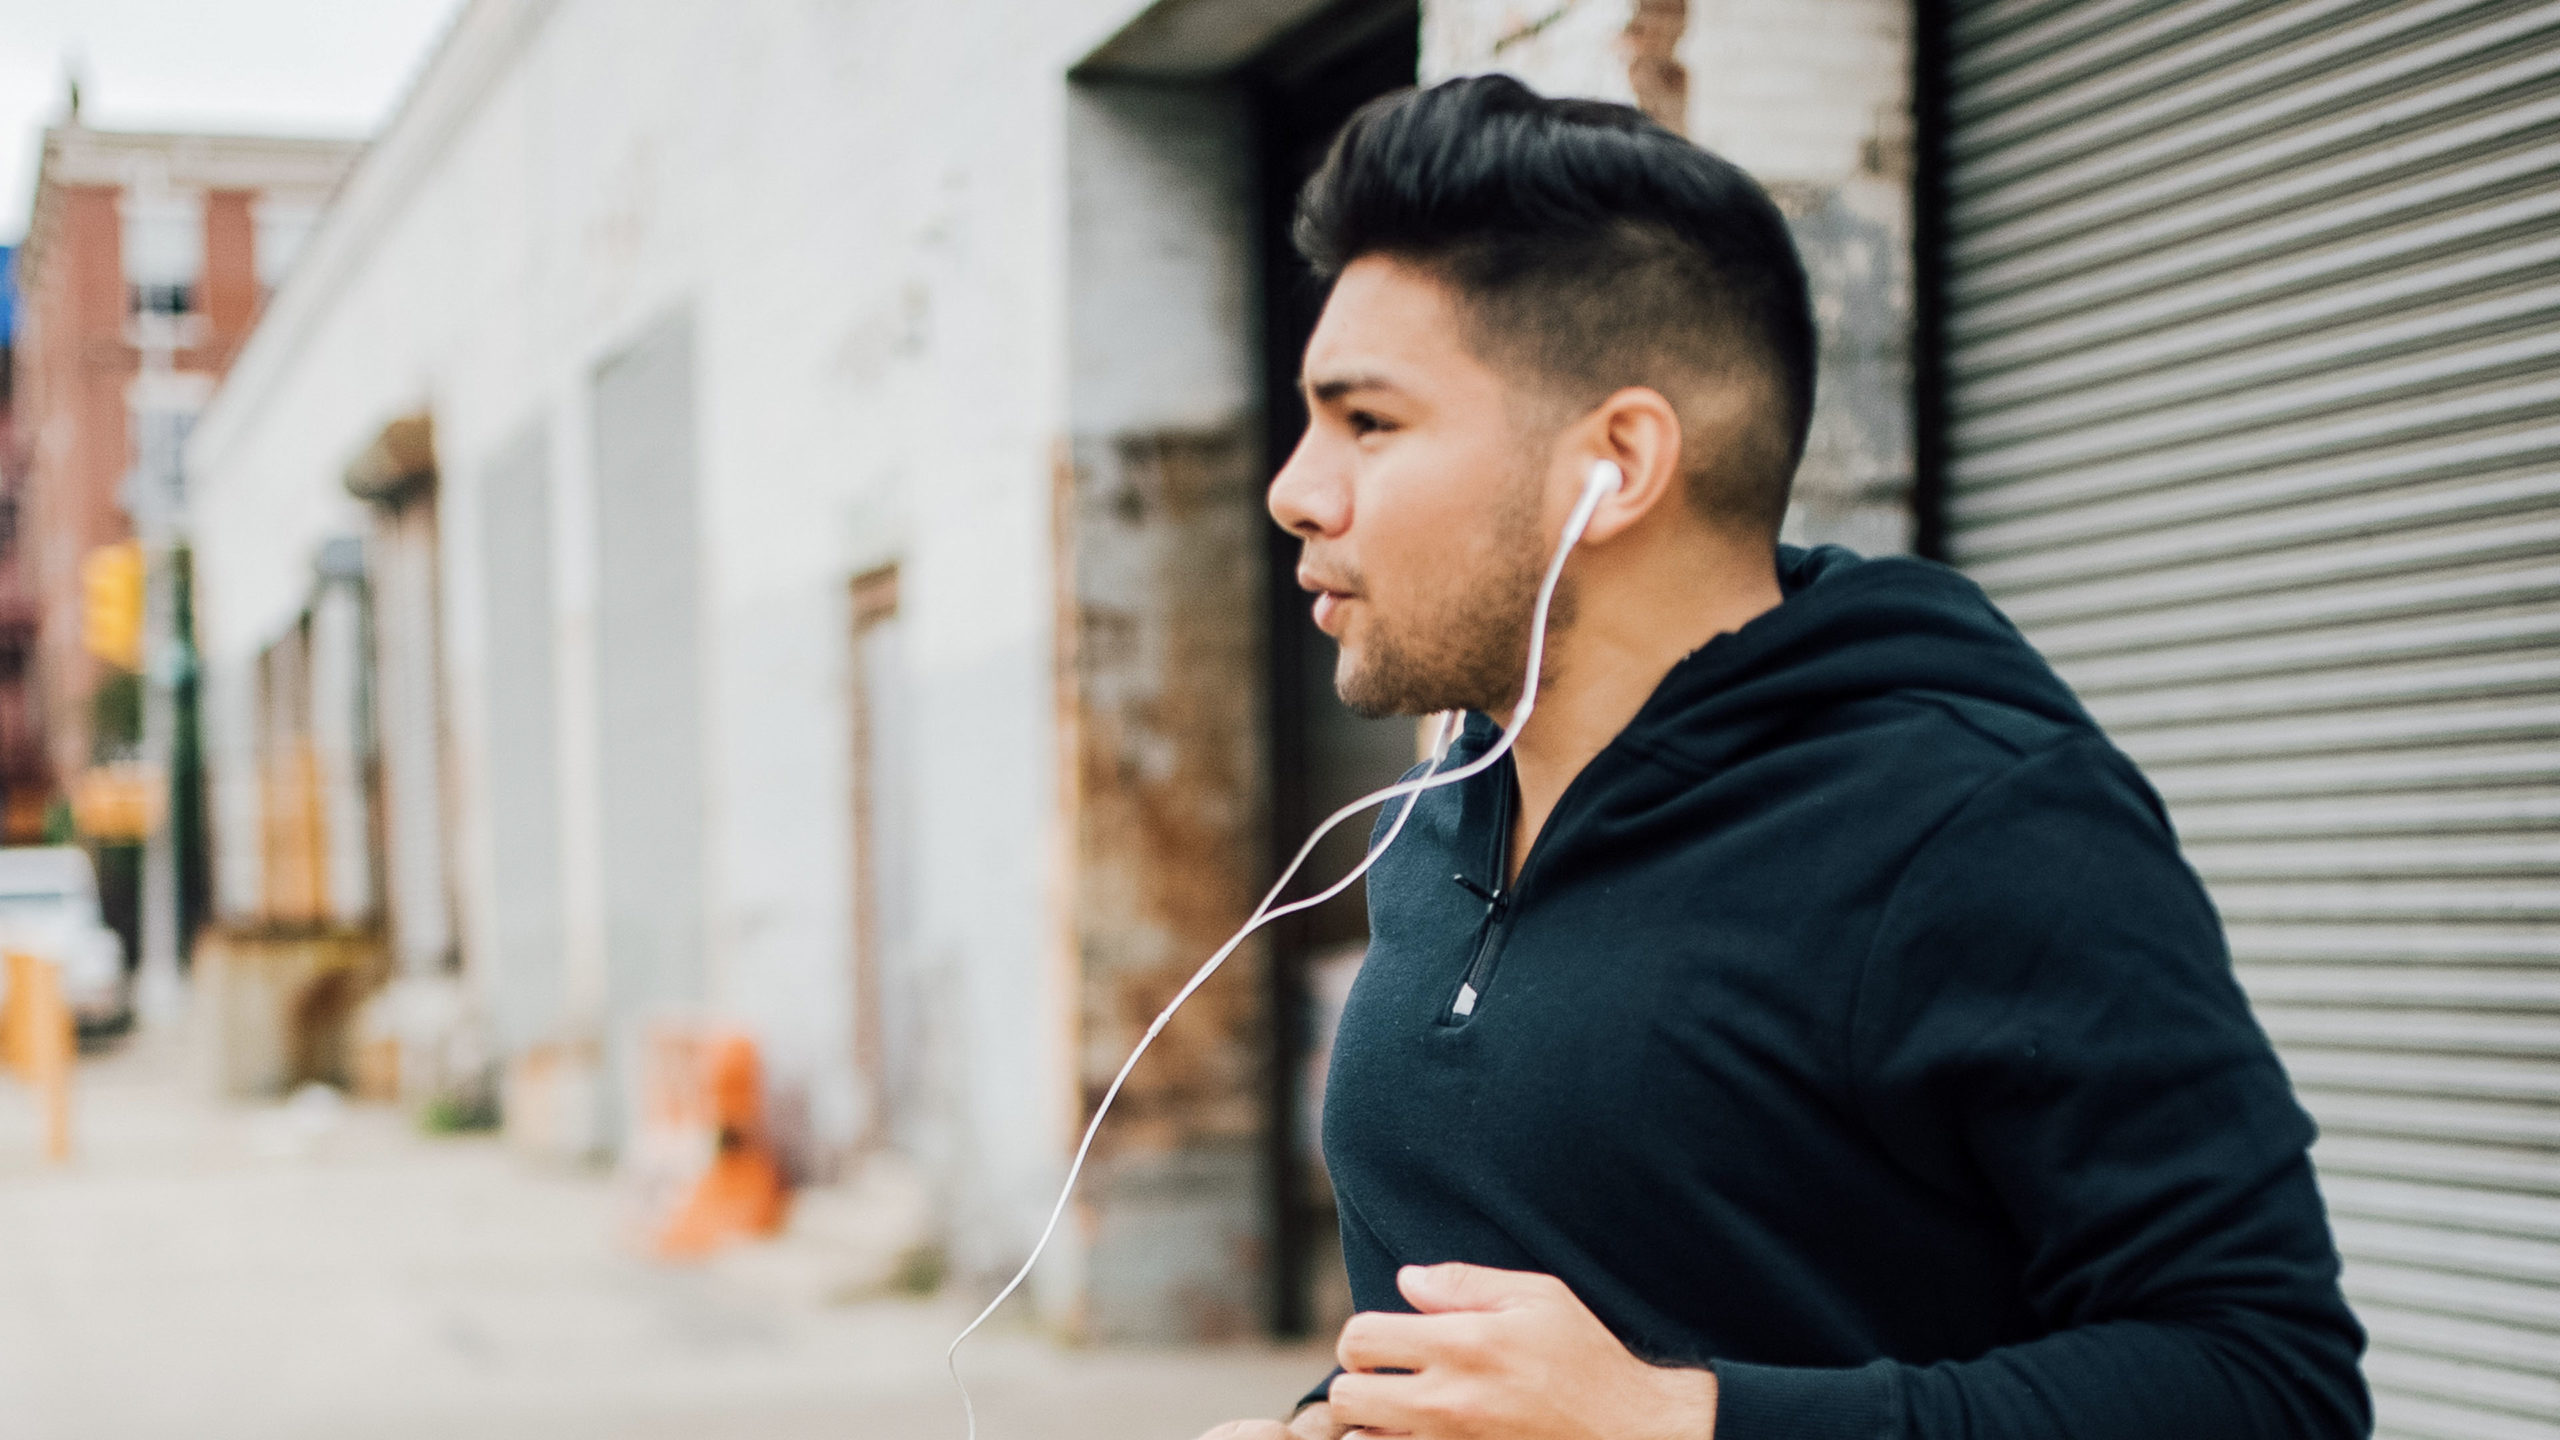 Latino man running with an earphones - dandy in the bronx - fitness man - black hoodie -